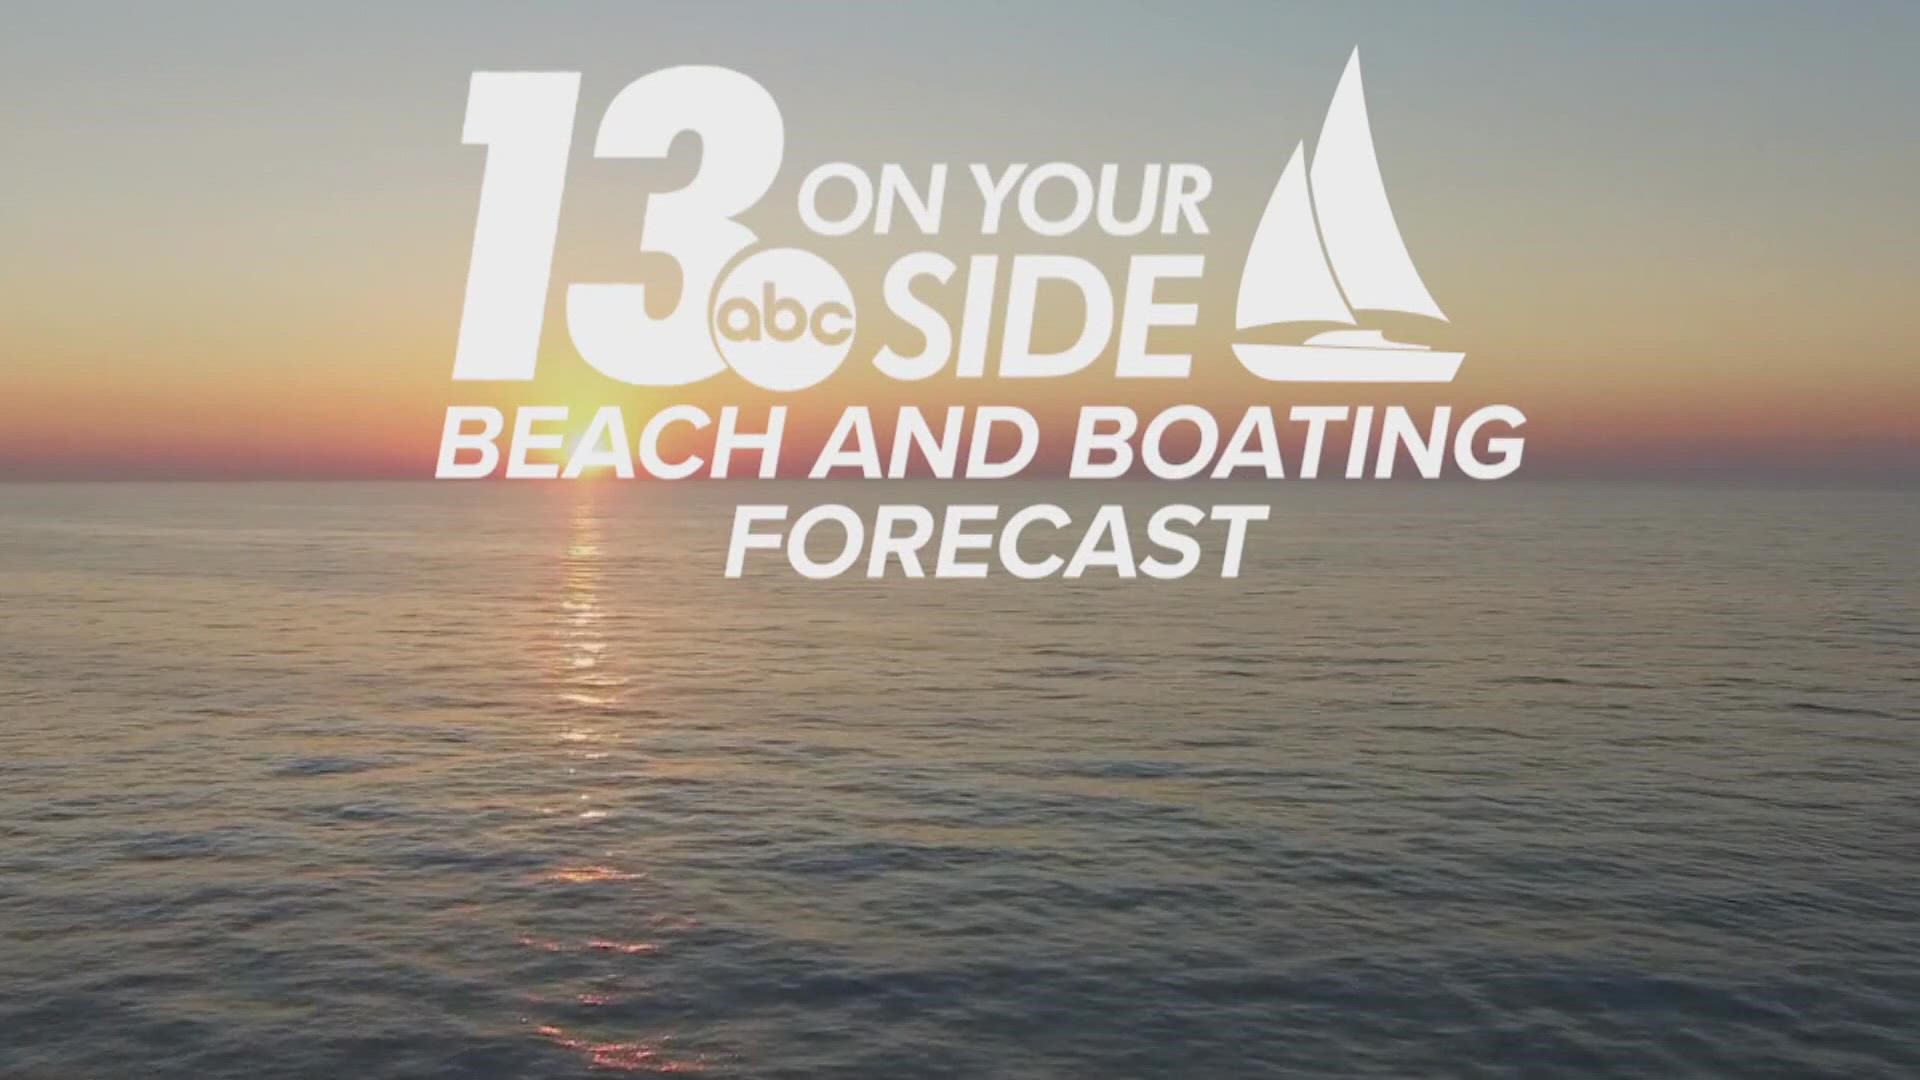 Meteorologist Michael Behrens has your latest West Michigan Beach and Boating forecast for Sunday 6/19/2022.